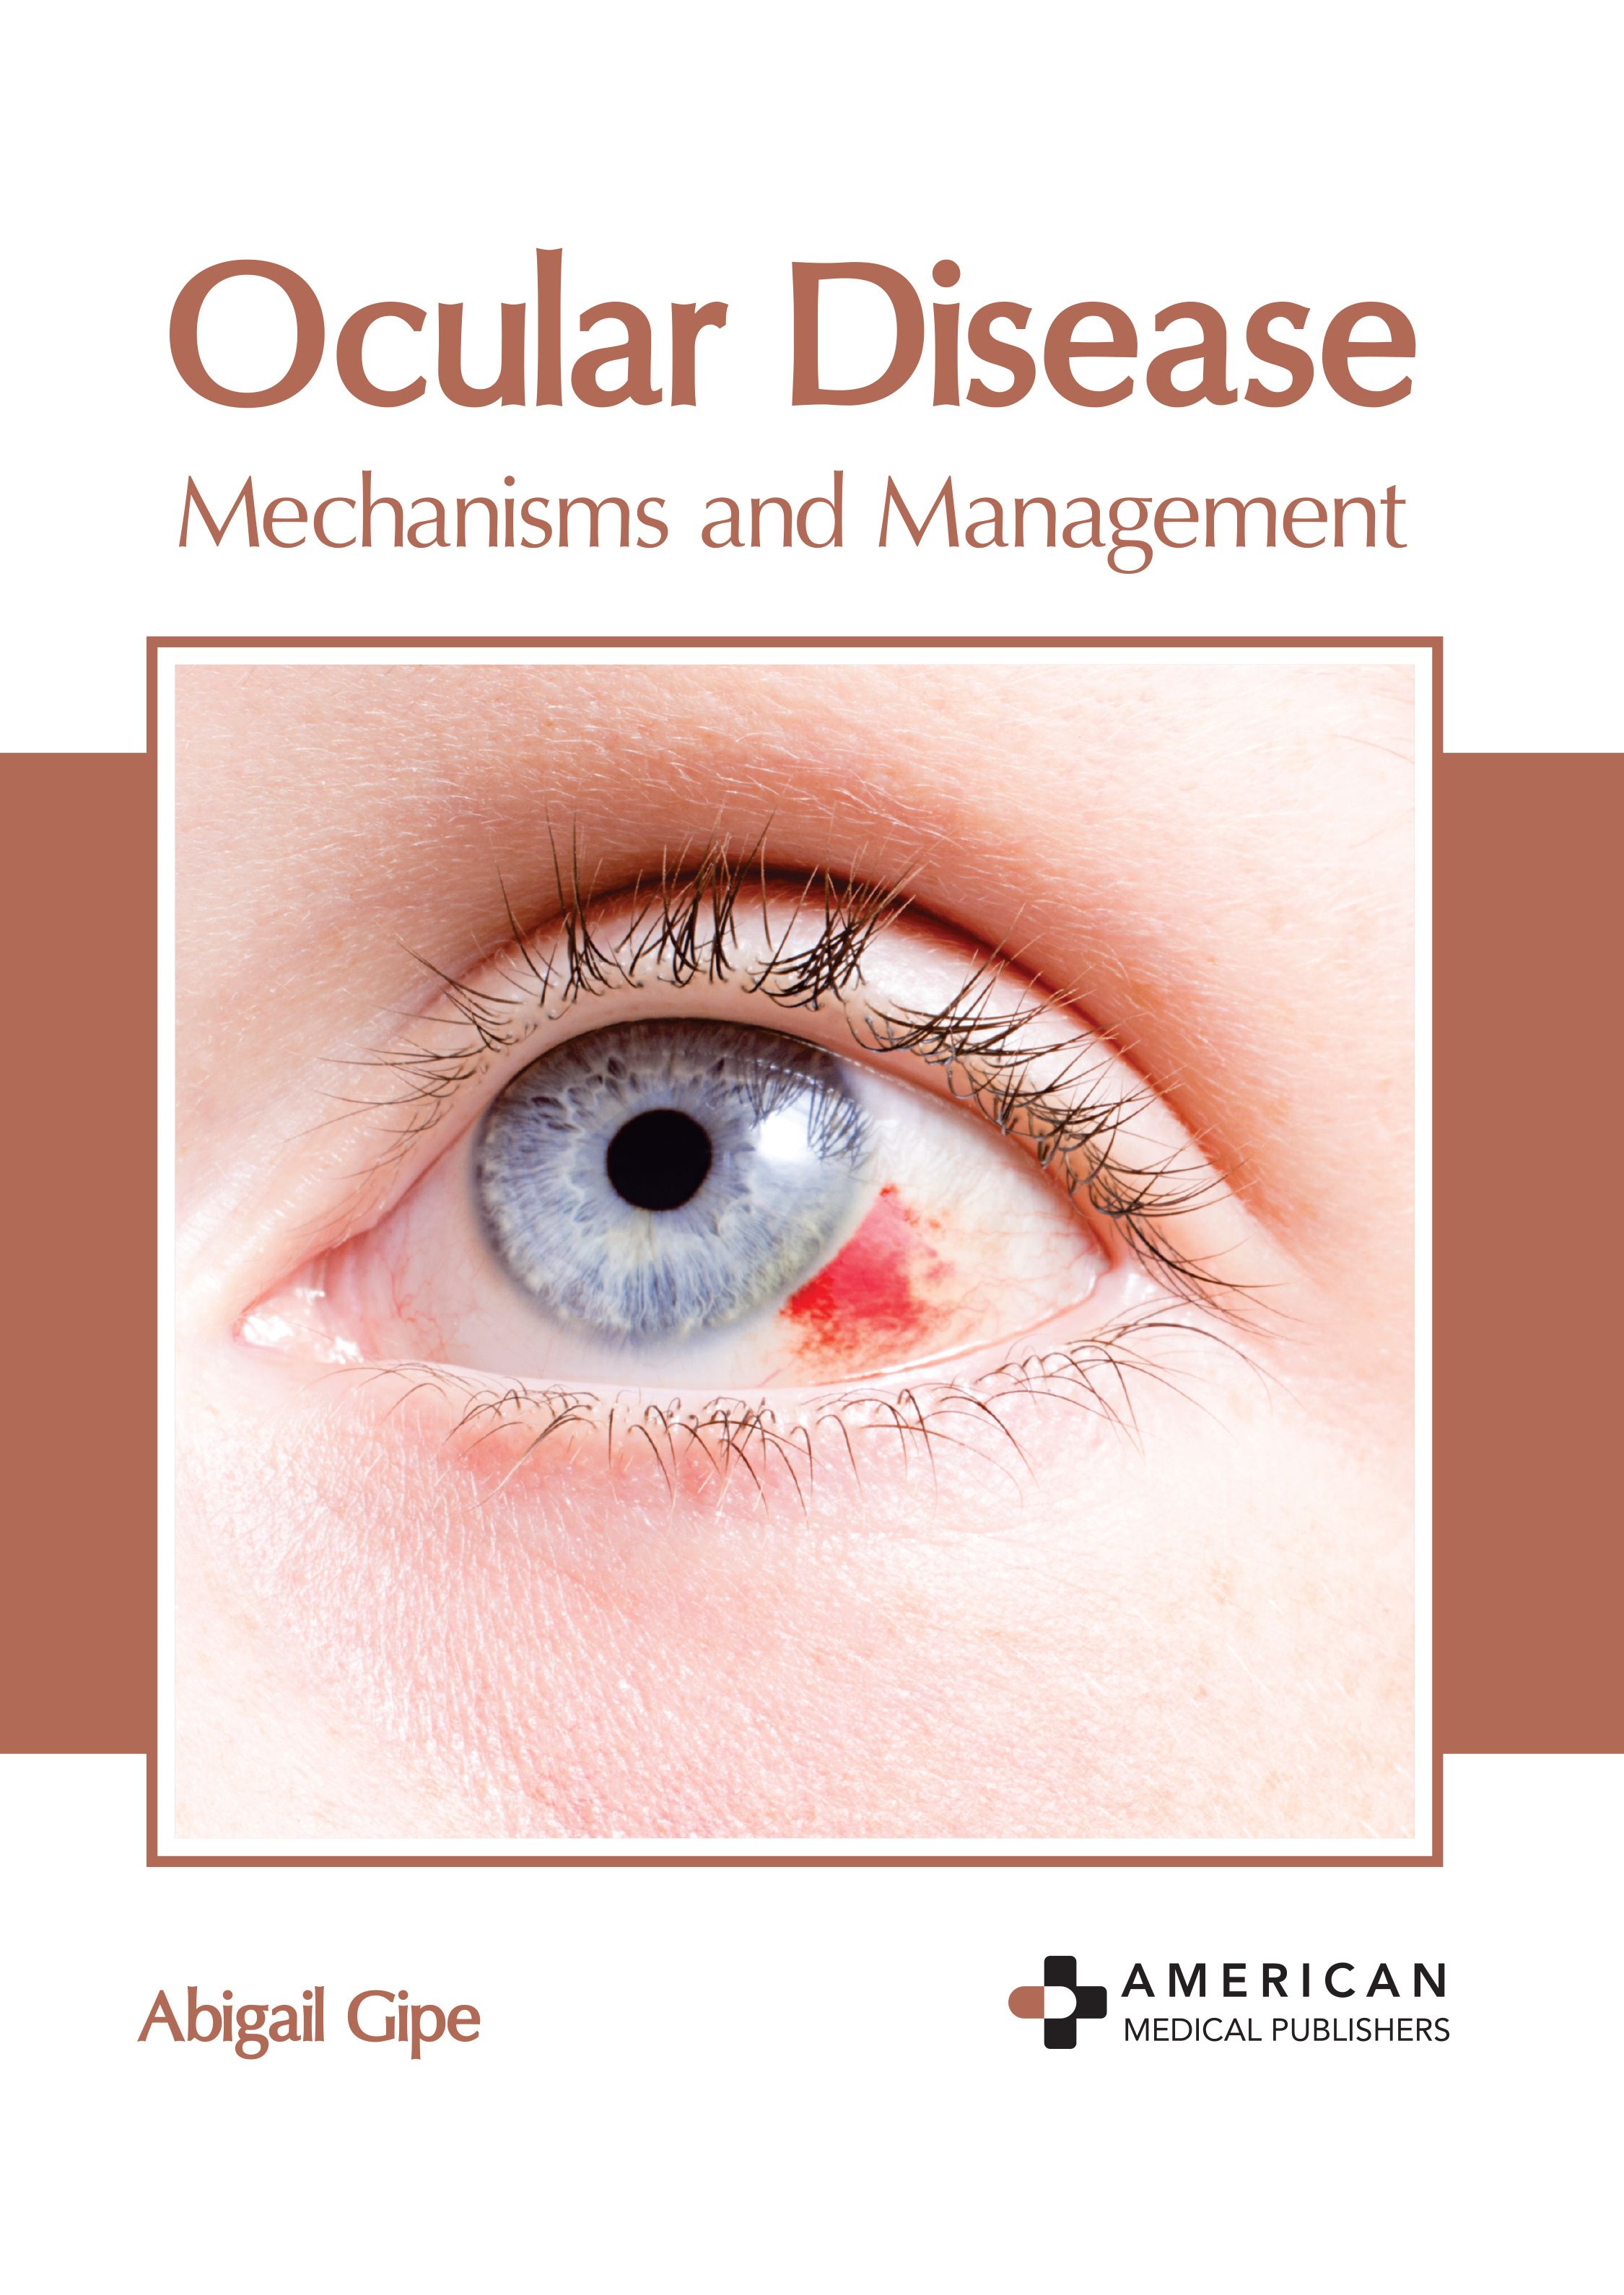 

exclusive-publishers/american-medical-publishers/ocular-disease-mechanisms-and-management-9798887403489